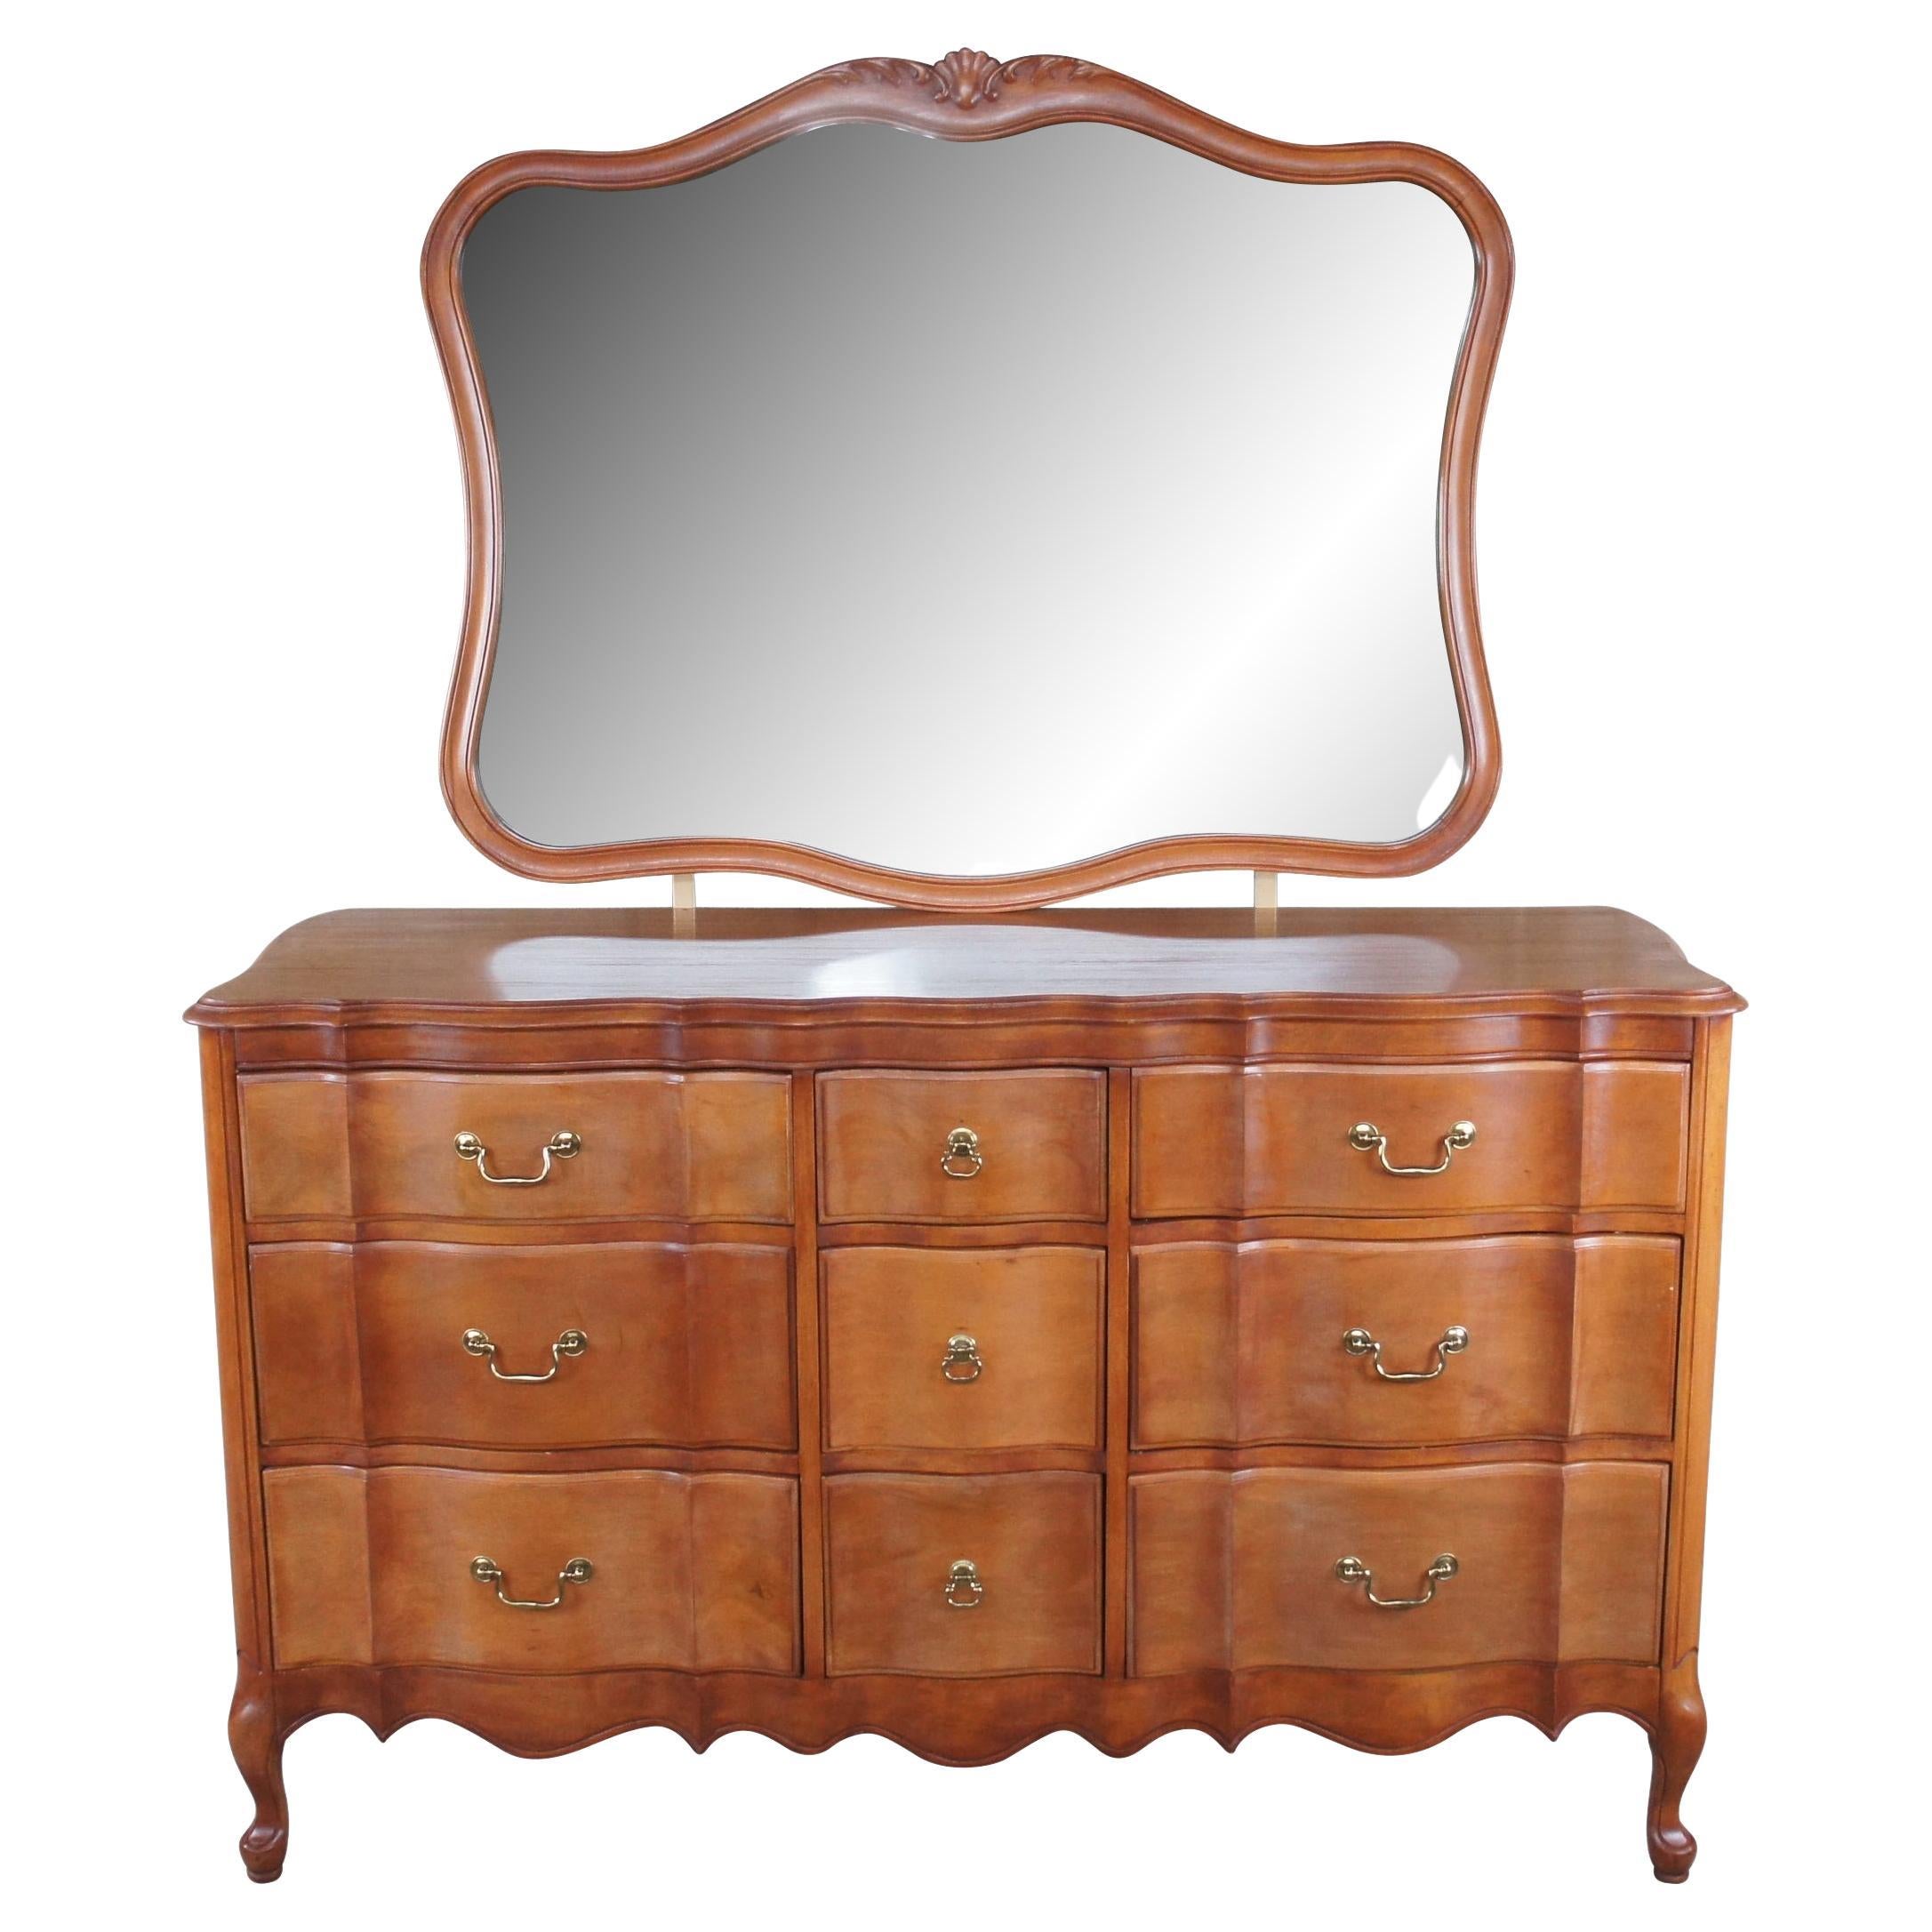 French Provincial Mahogany Serpentine Dresser Chest of Drawers w Vanity Mirror For Sale